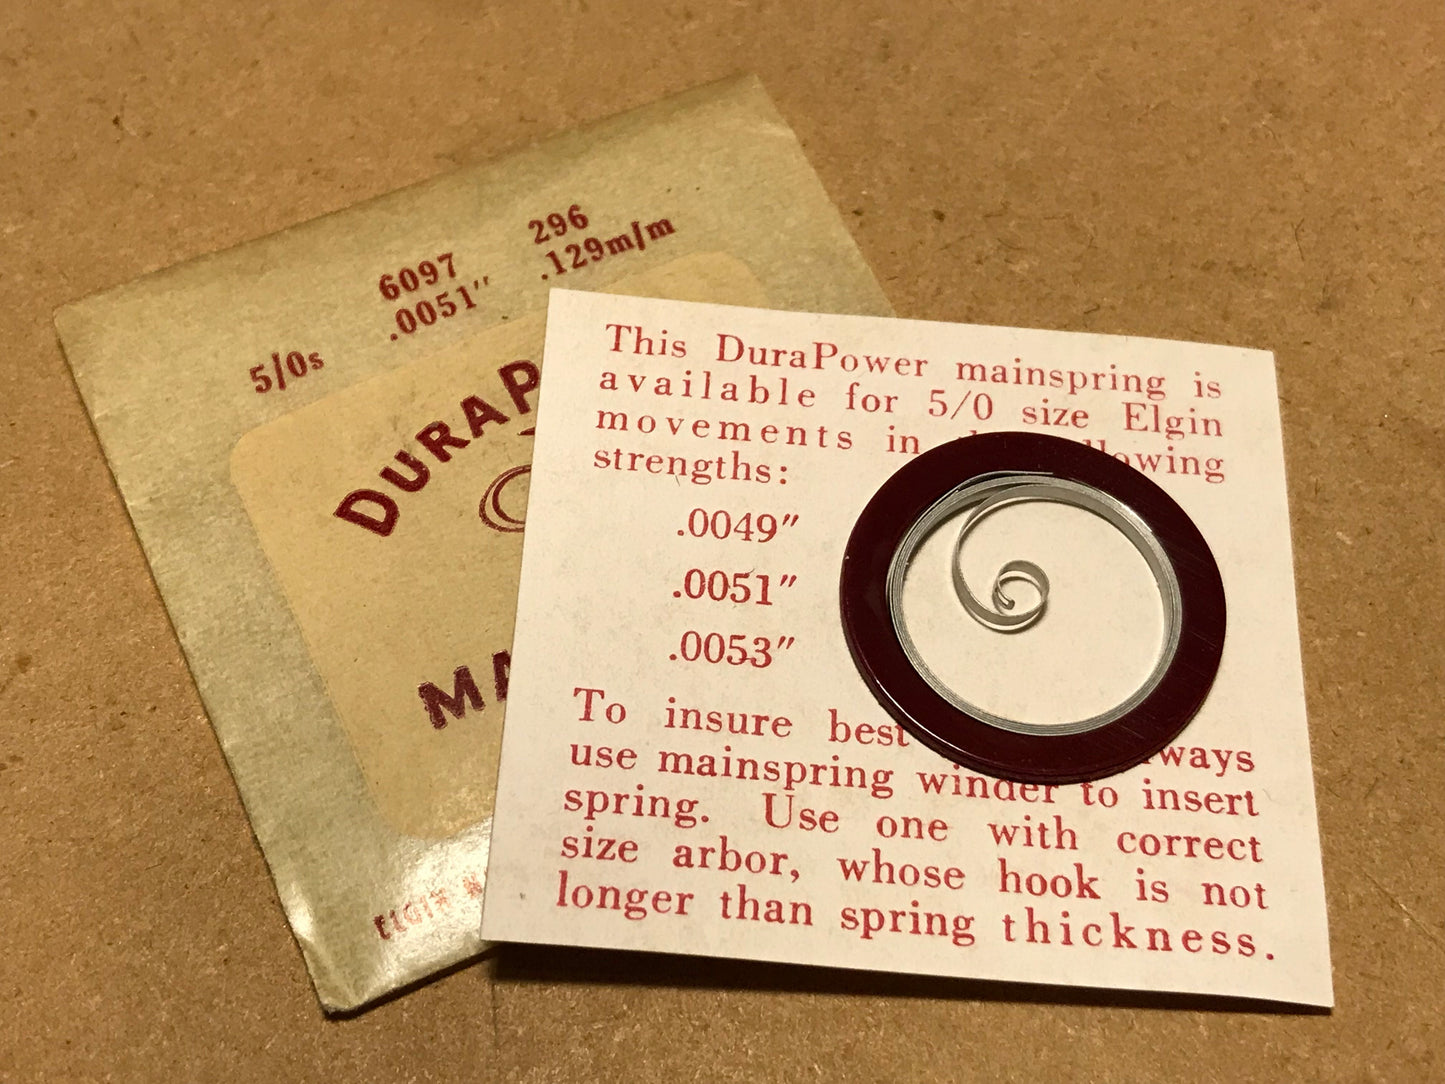 Elgin DuraPower Mainspring for 5/0s movements #6097 - Alloy